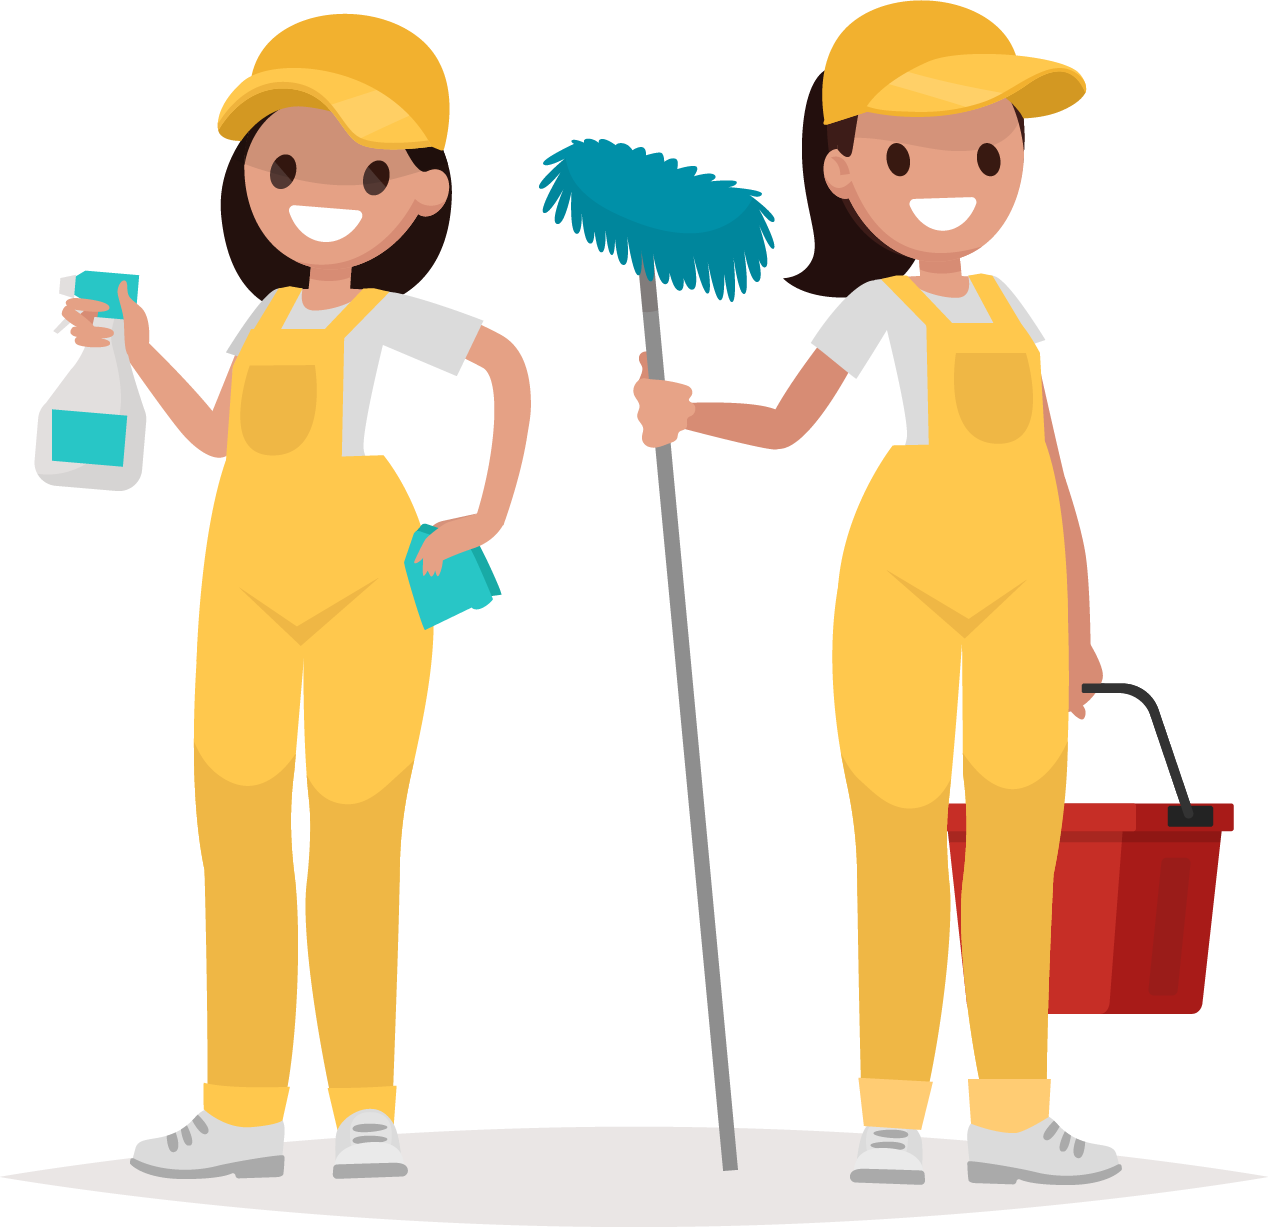 Carpet Cleaning Services - Woman Worker Vector (1268x1227)